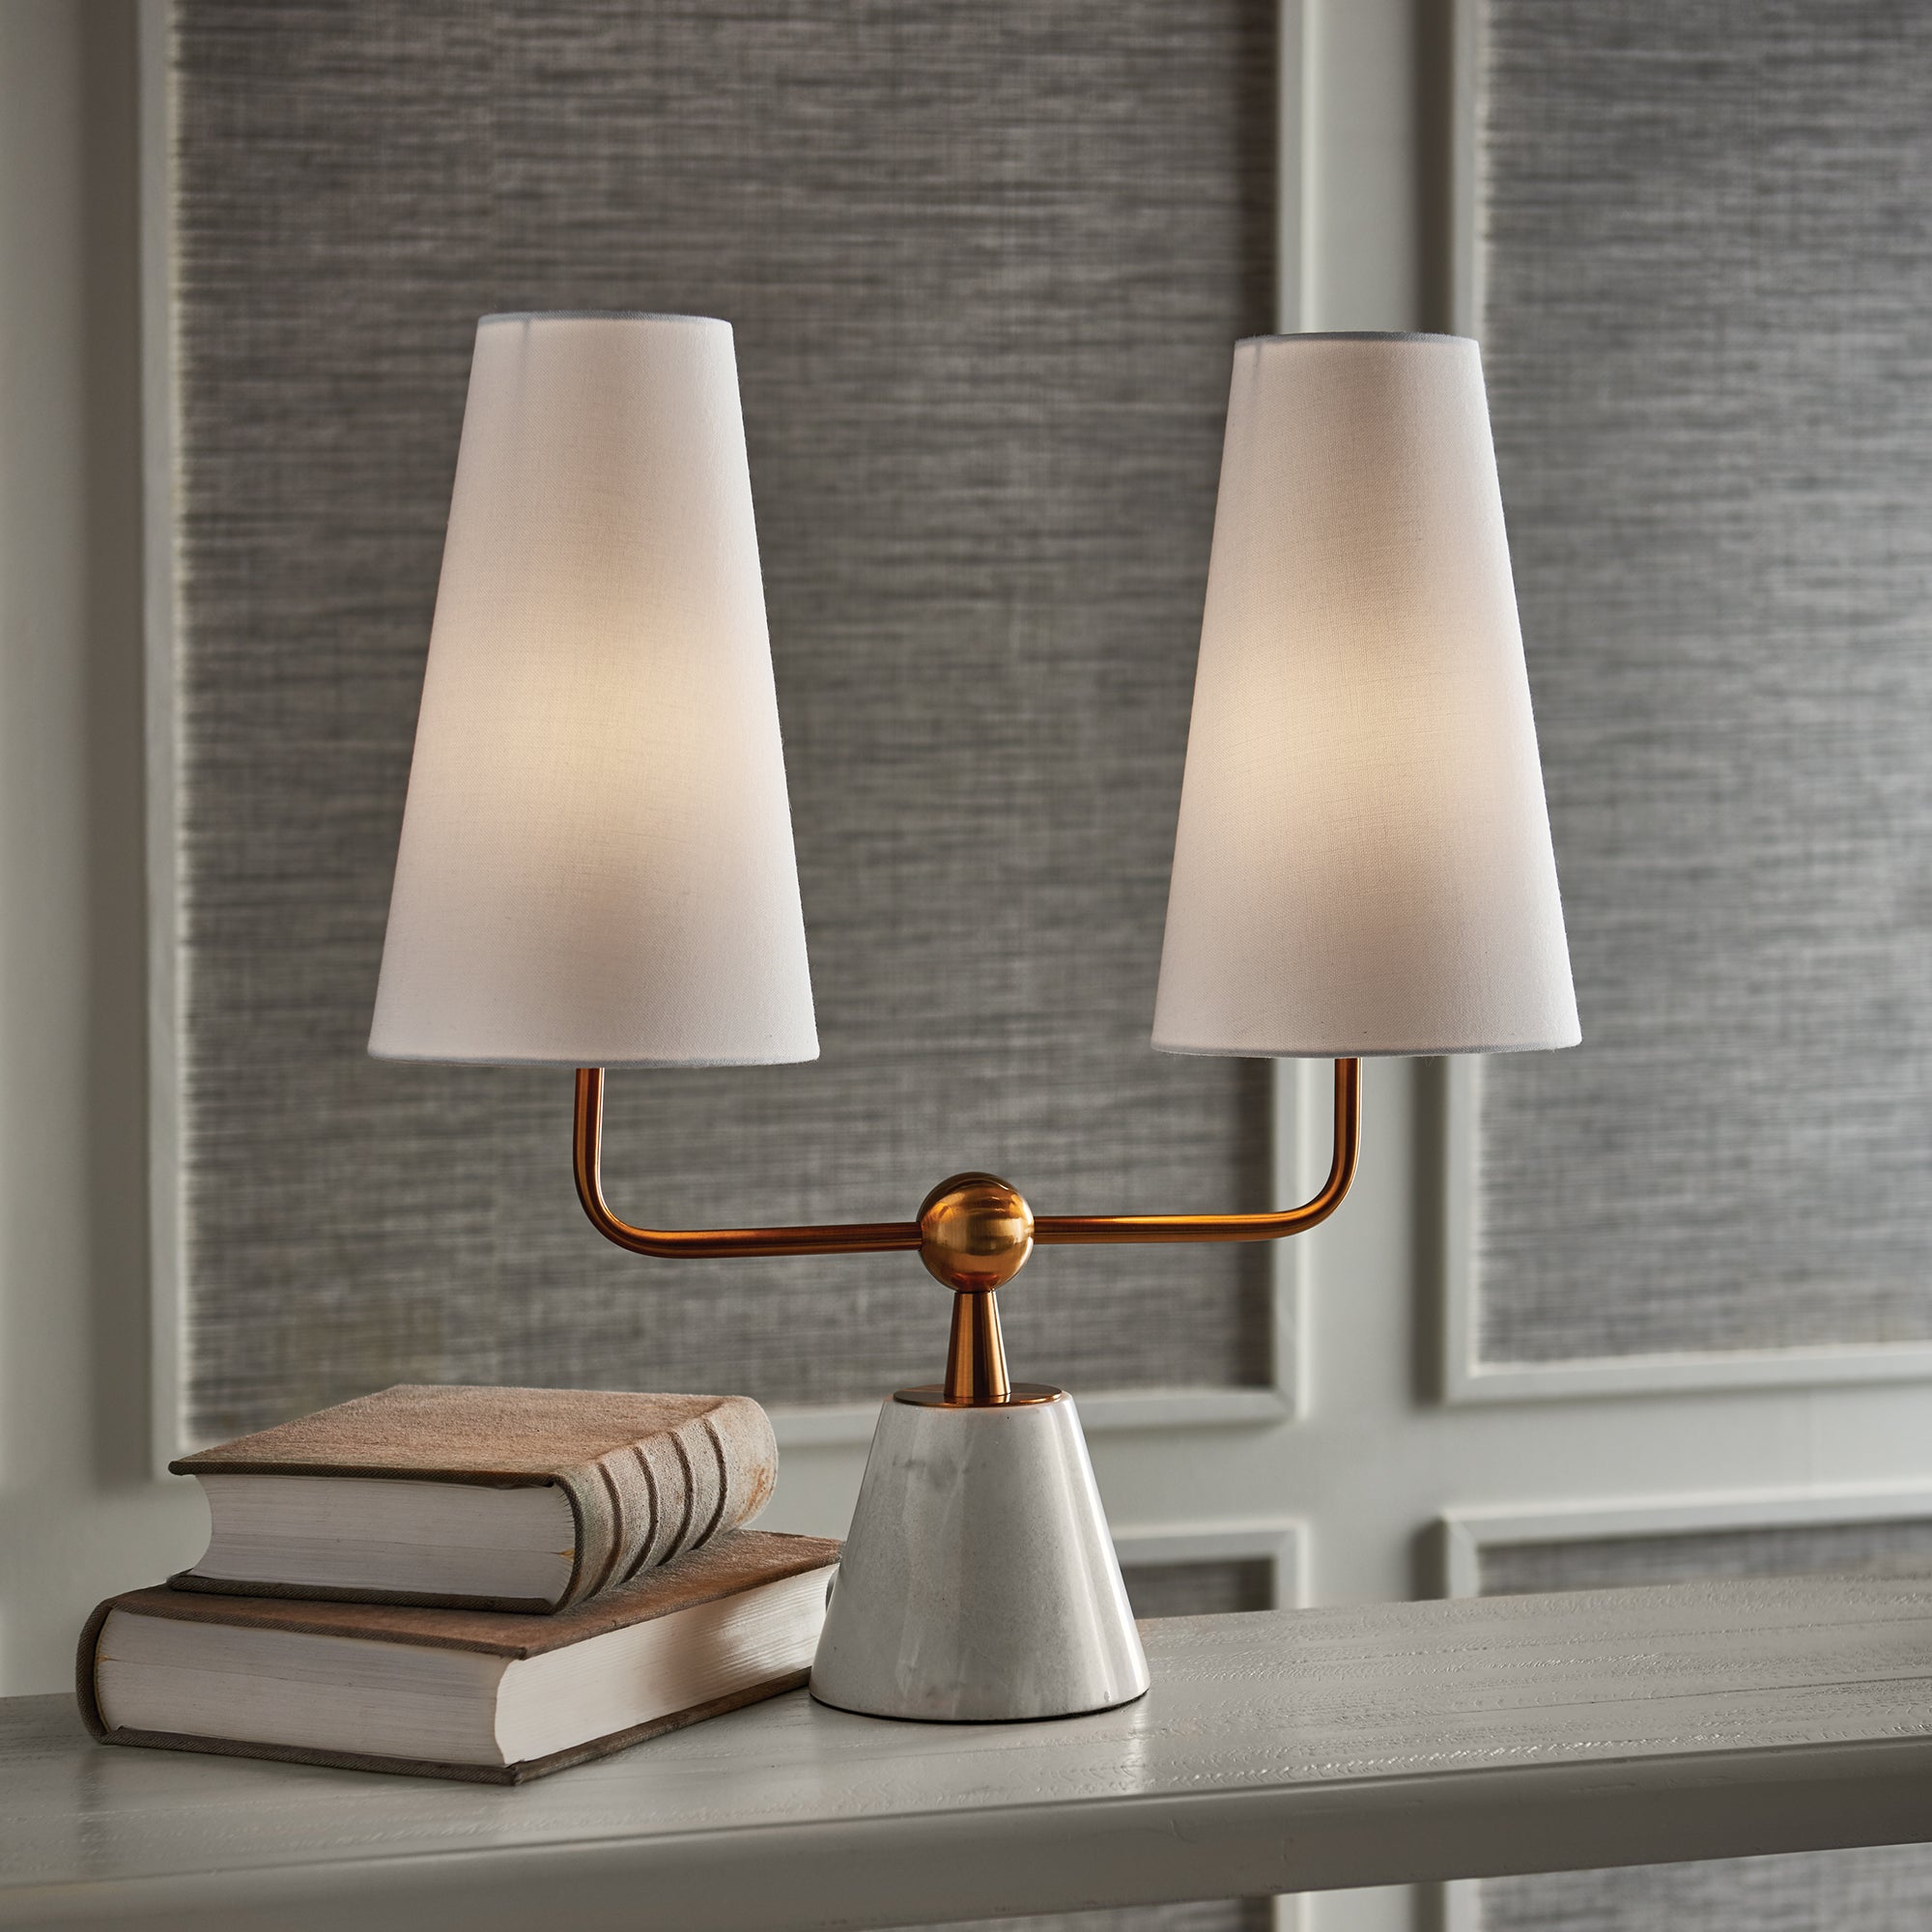 With dramatically elongated shades, the Madison Dublet Lamp is clean and modern. The brass finish and marble base give it a touch of classic elegance. Amethyst Home provides interior design, new construction, custom furniture, and area rugs in the Winter Garden metro area.